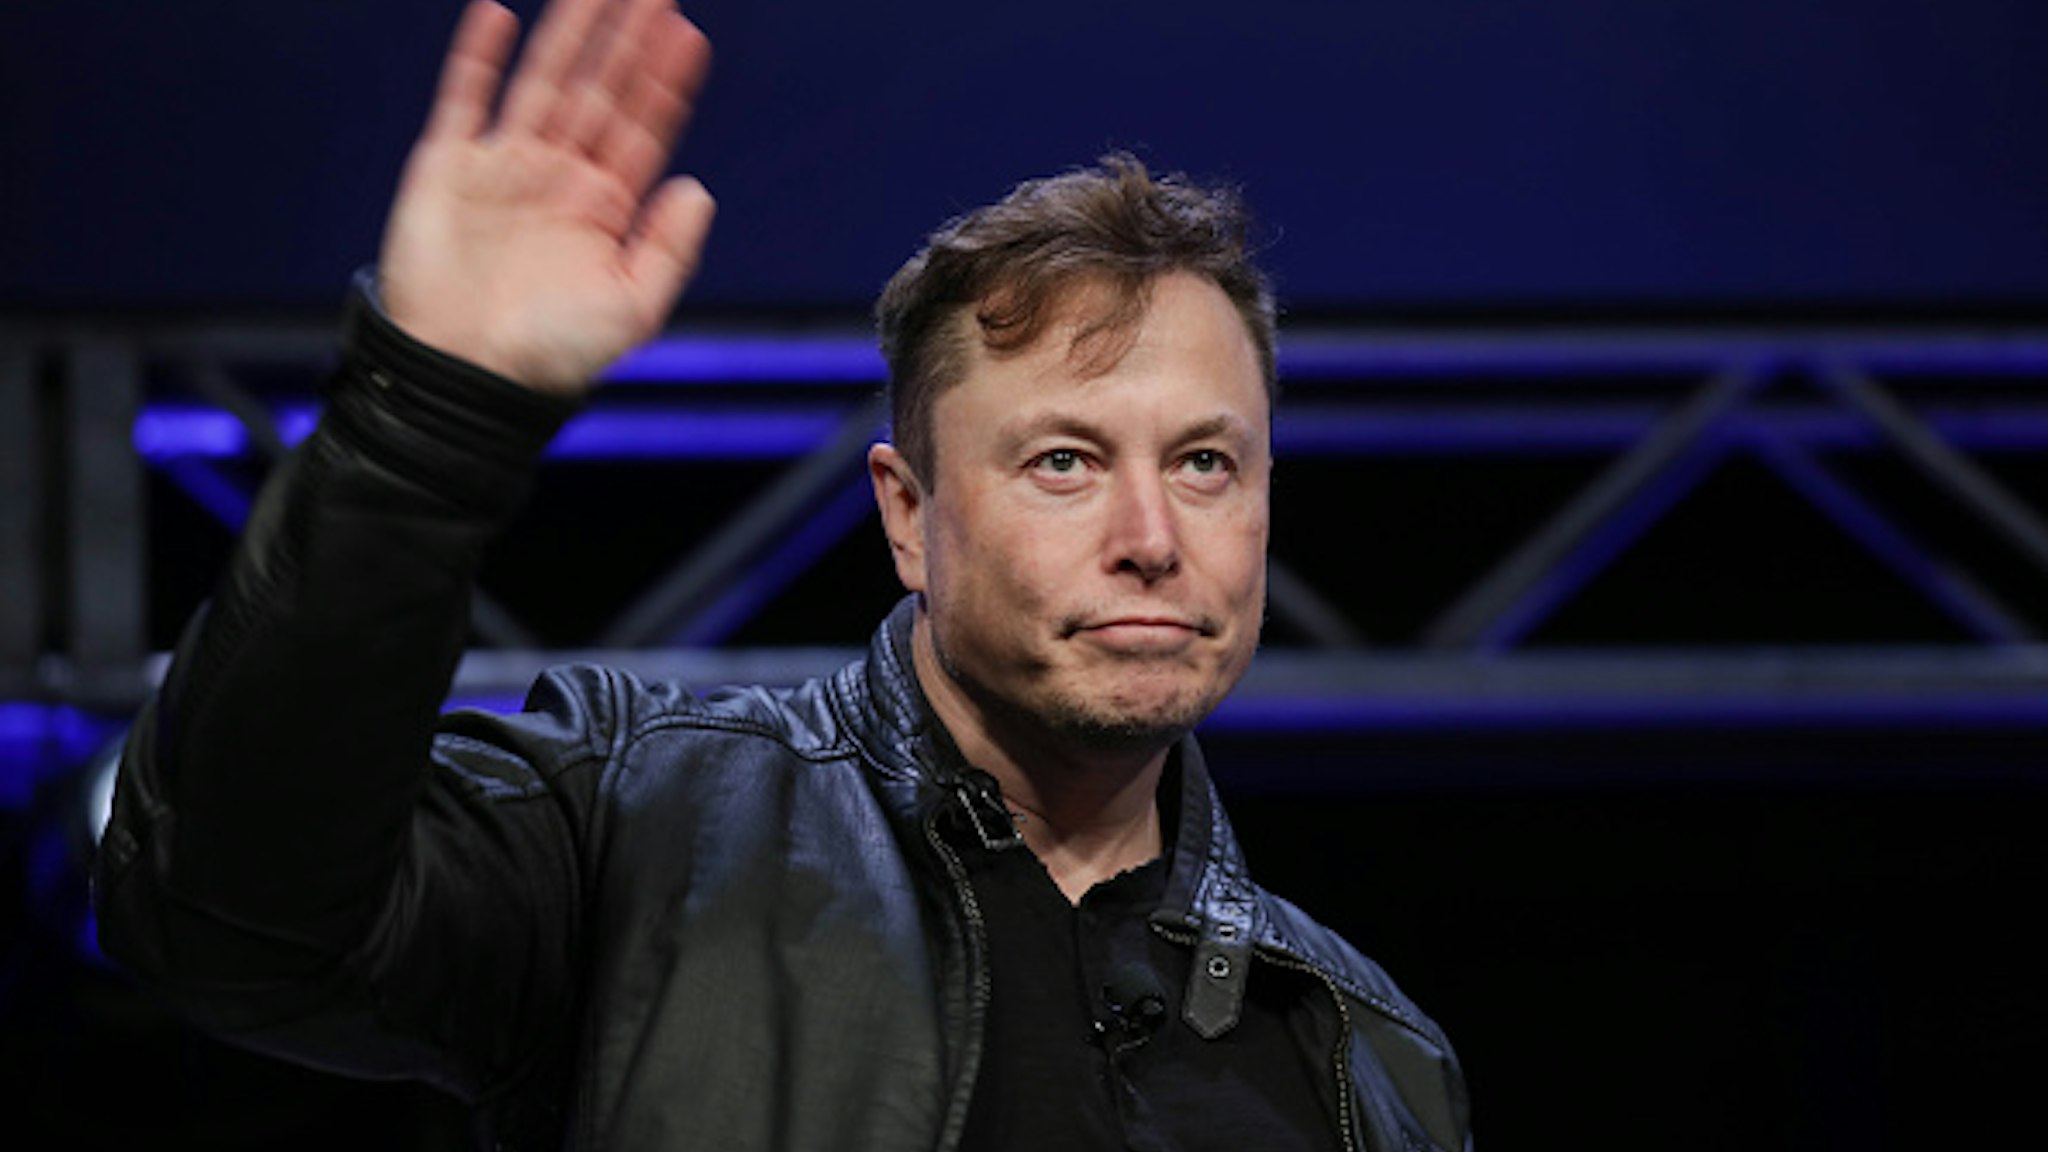 WASHINGTON DC, USA - MARCH 9: Elon Musk, Founder and Chief Engineer of SpaceX, attends the Satellite 2020 Conference in Washington, DC, United States on March 9, 2020.